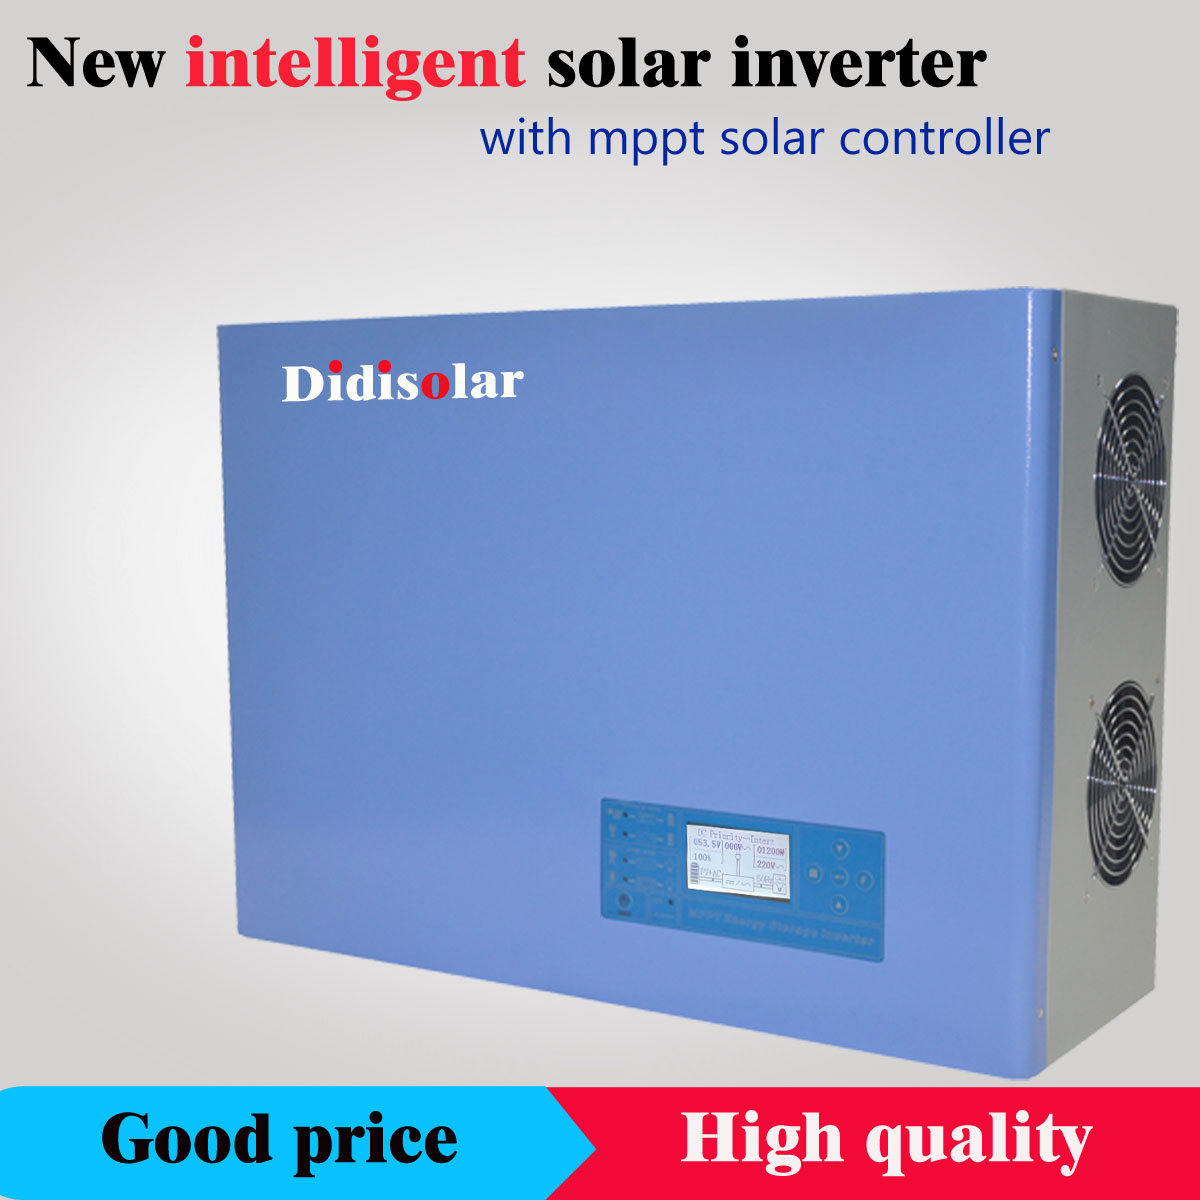 How to set the time, language, contrast, brightness and sound of Didisolar solar inverter